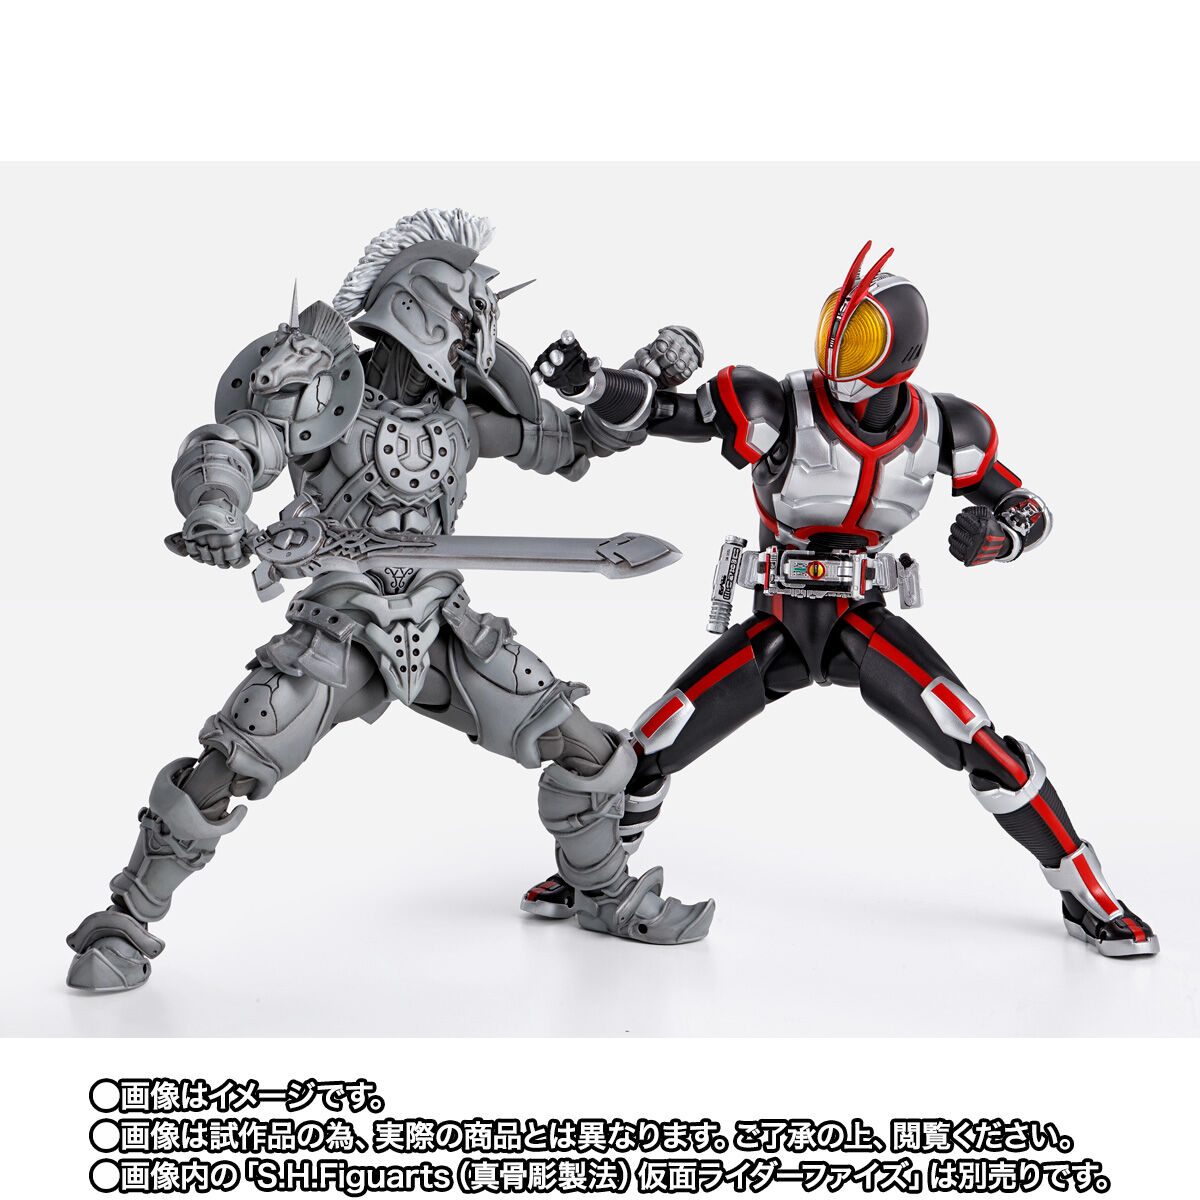 H.Figuarts 真骨彫製法 仮面ライダーファイズ ホースオルフェノク 新品-